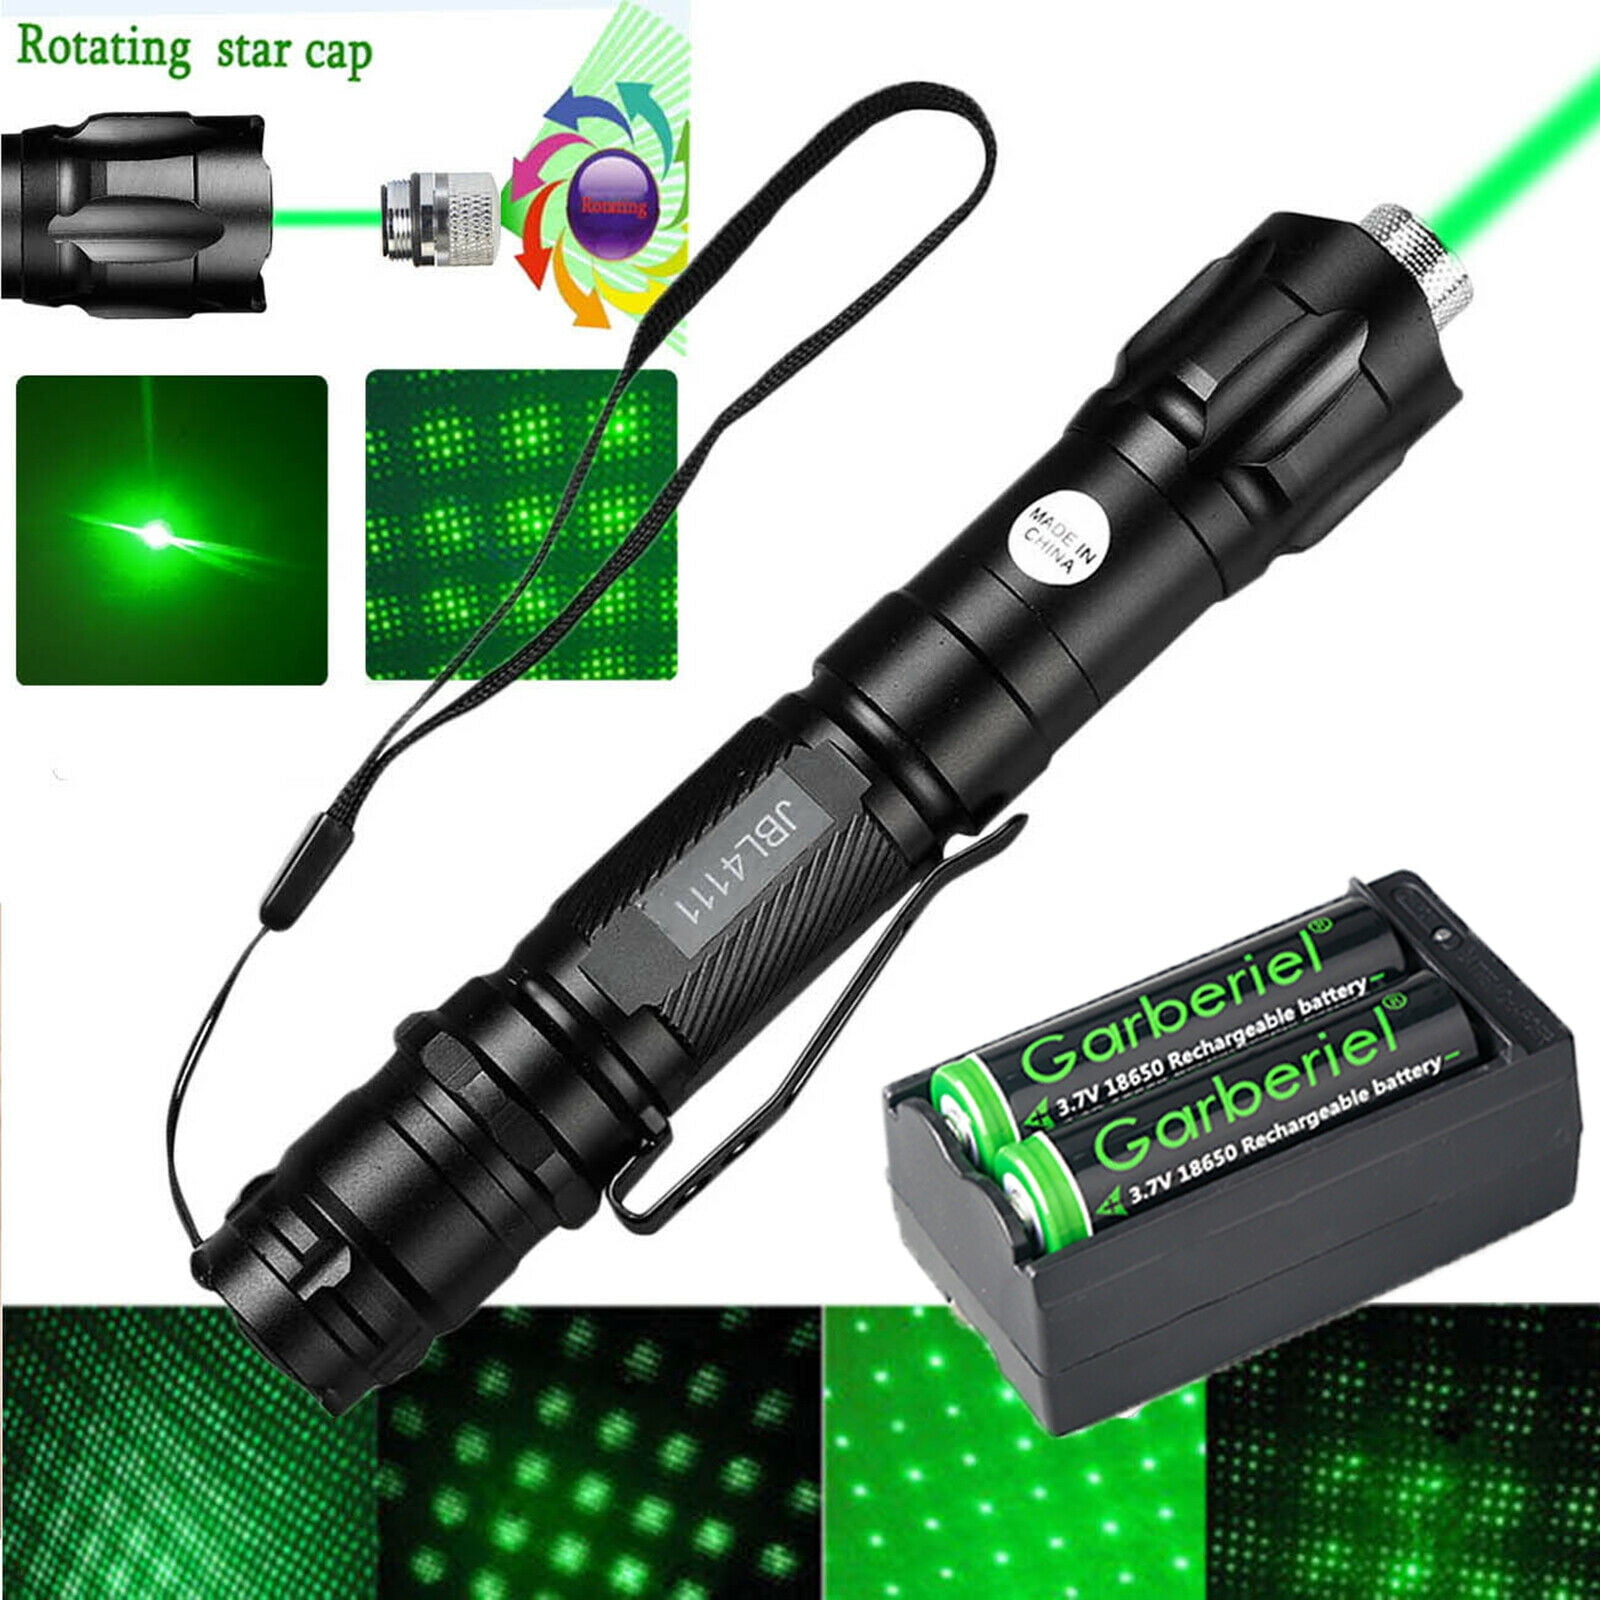 2X Star Cap Visible 650nm Beam Ultra Bright Green Laser 500Miles Pointer Pet Toy 